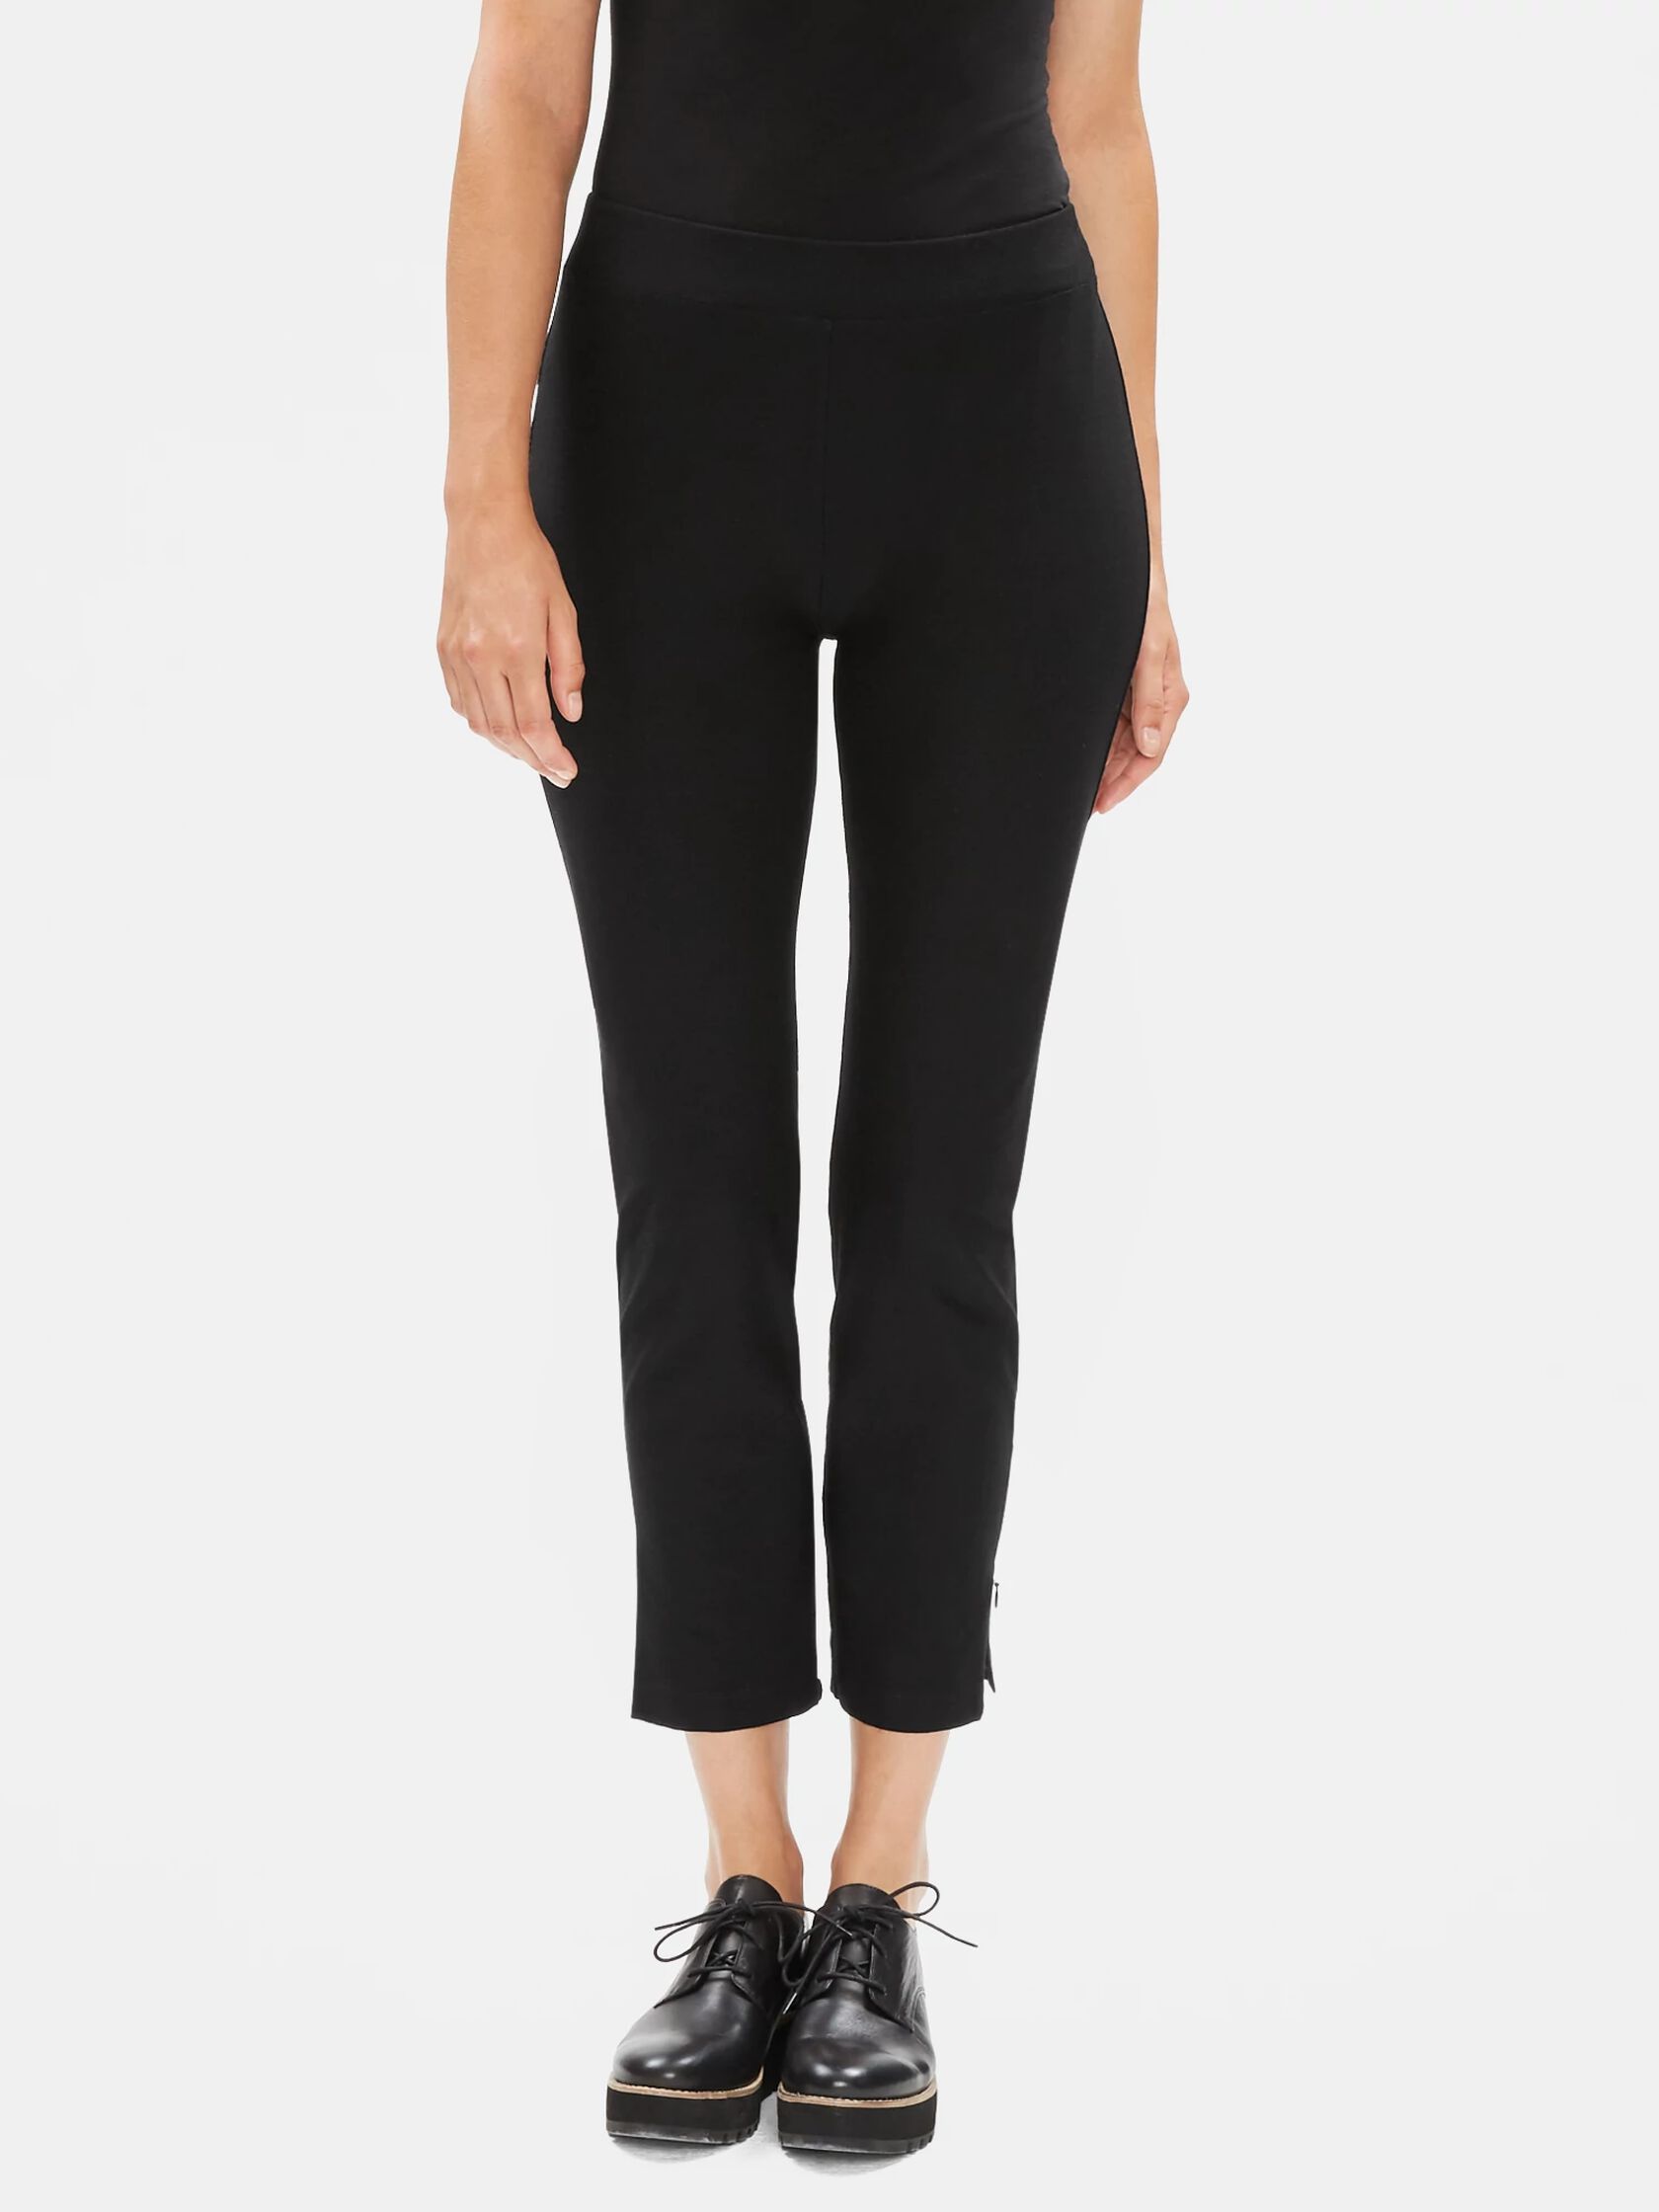 Washable Stretch Crepe Slim Ankle Pant with Zipper Slits